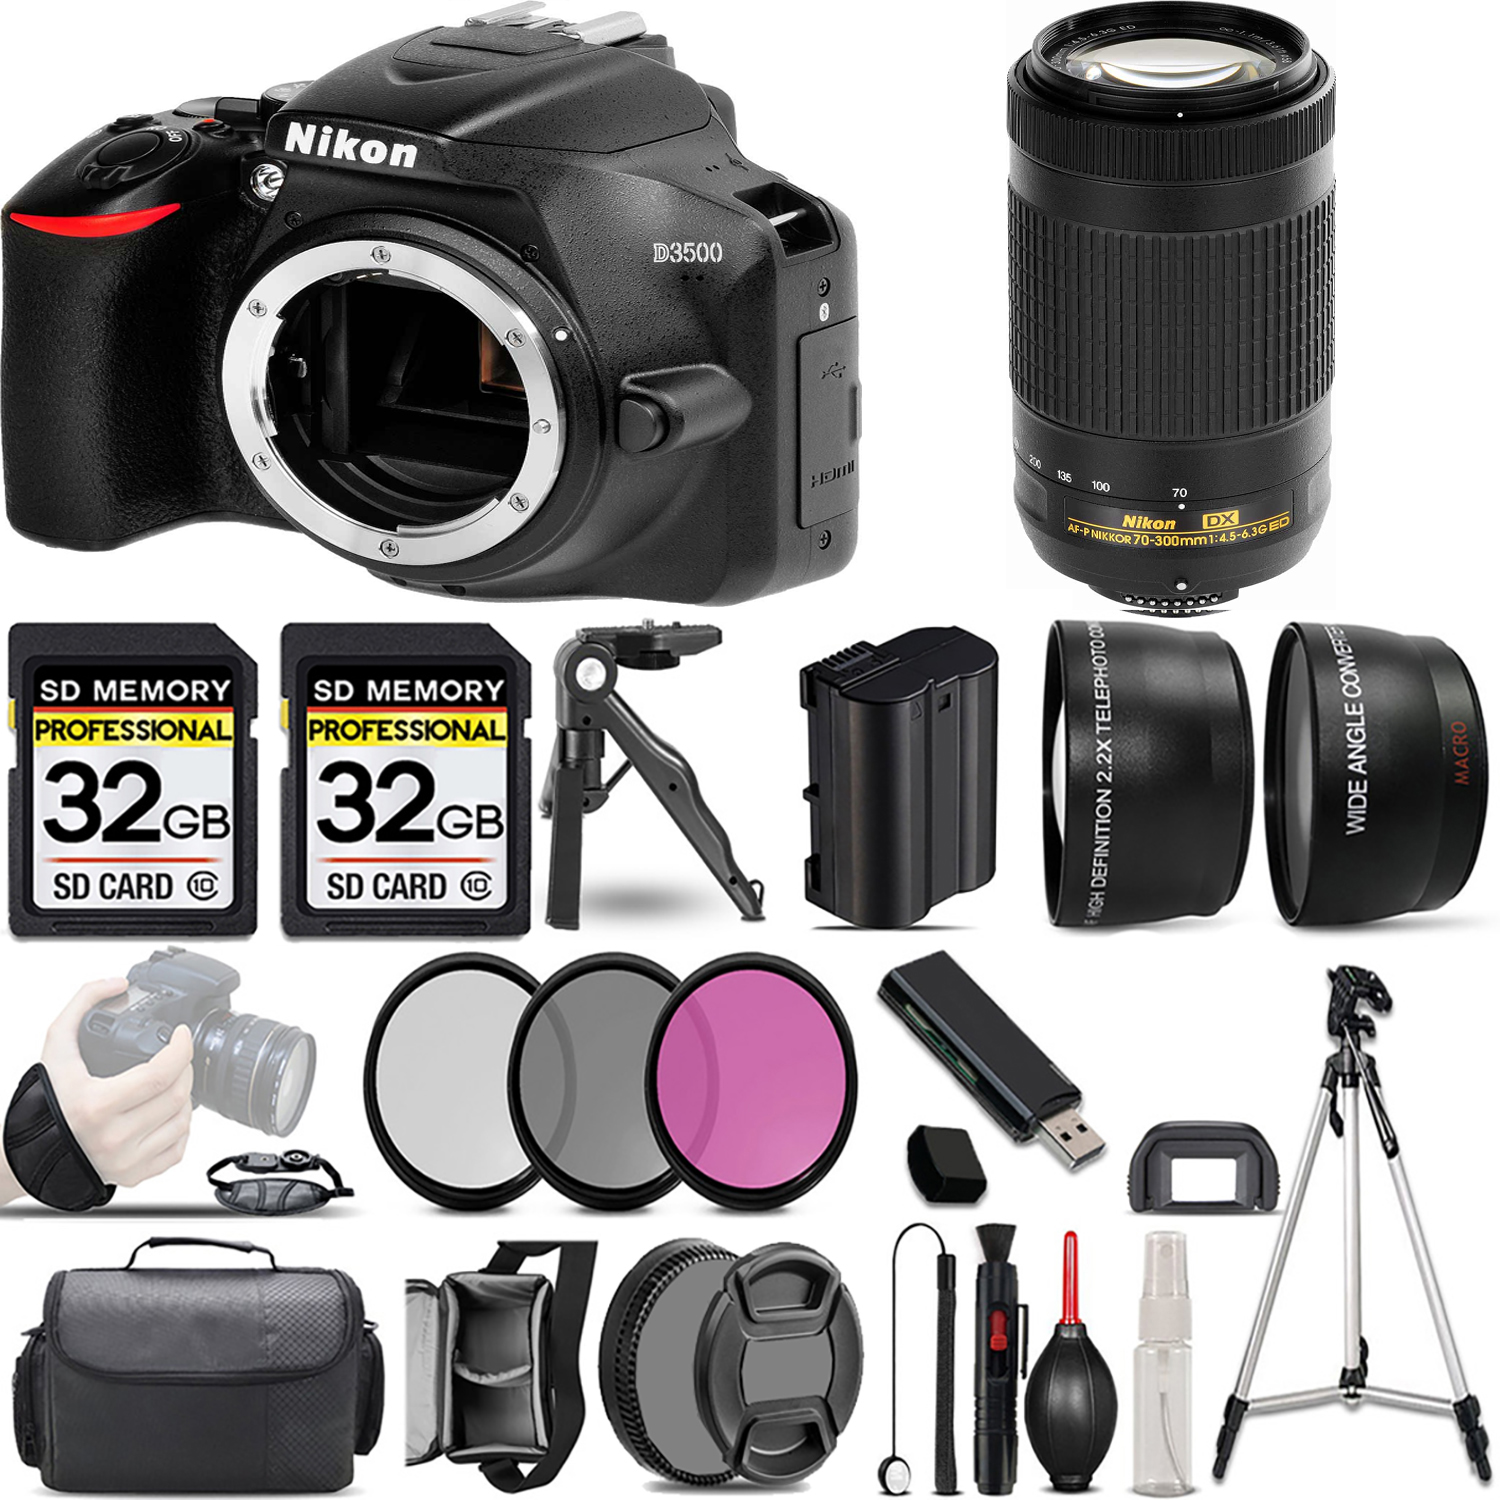 D3500 DSLR Camera (Body Only) + 70- 300mm Lens + 3 Piece Filter Set + 64GB *FREE SHIPPING*